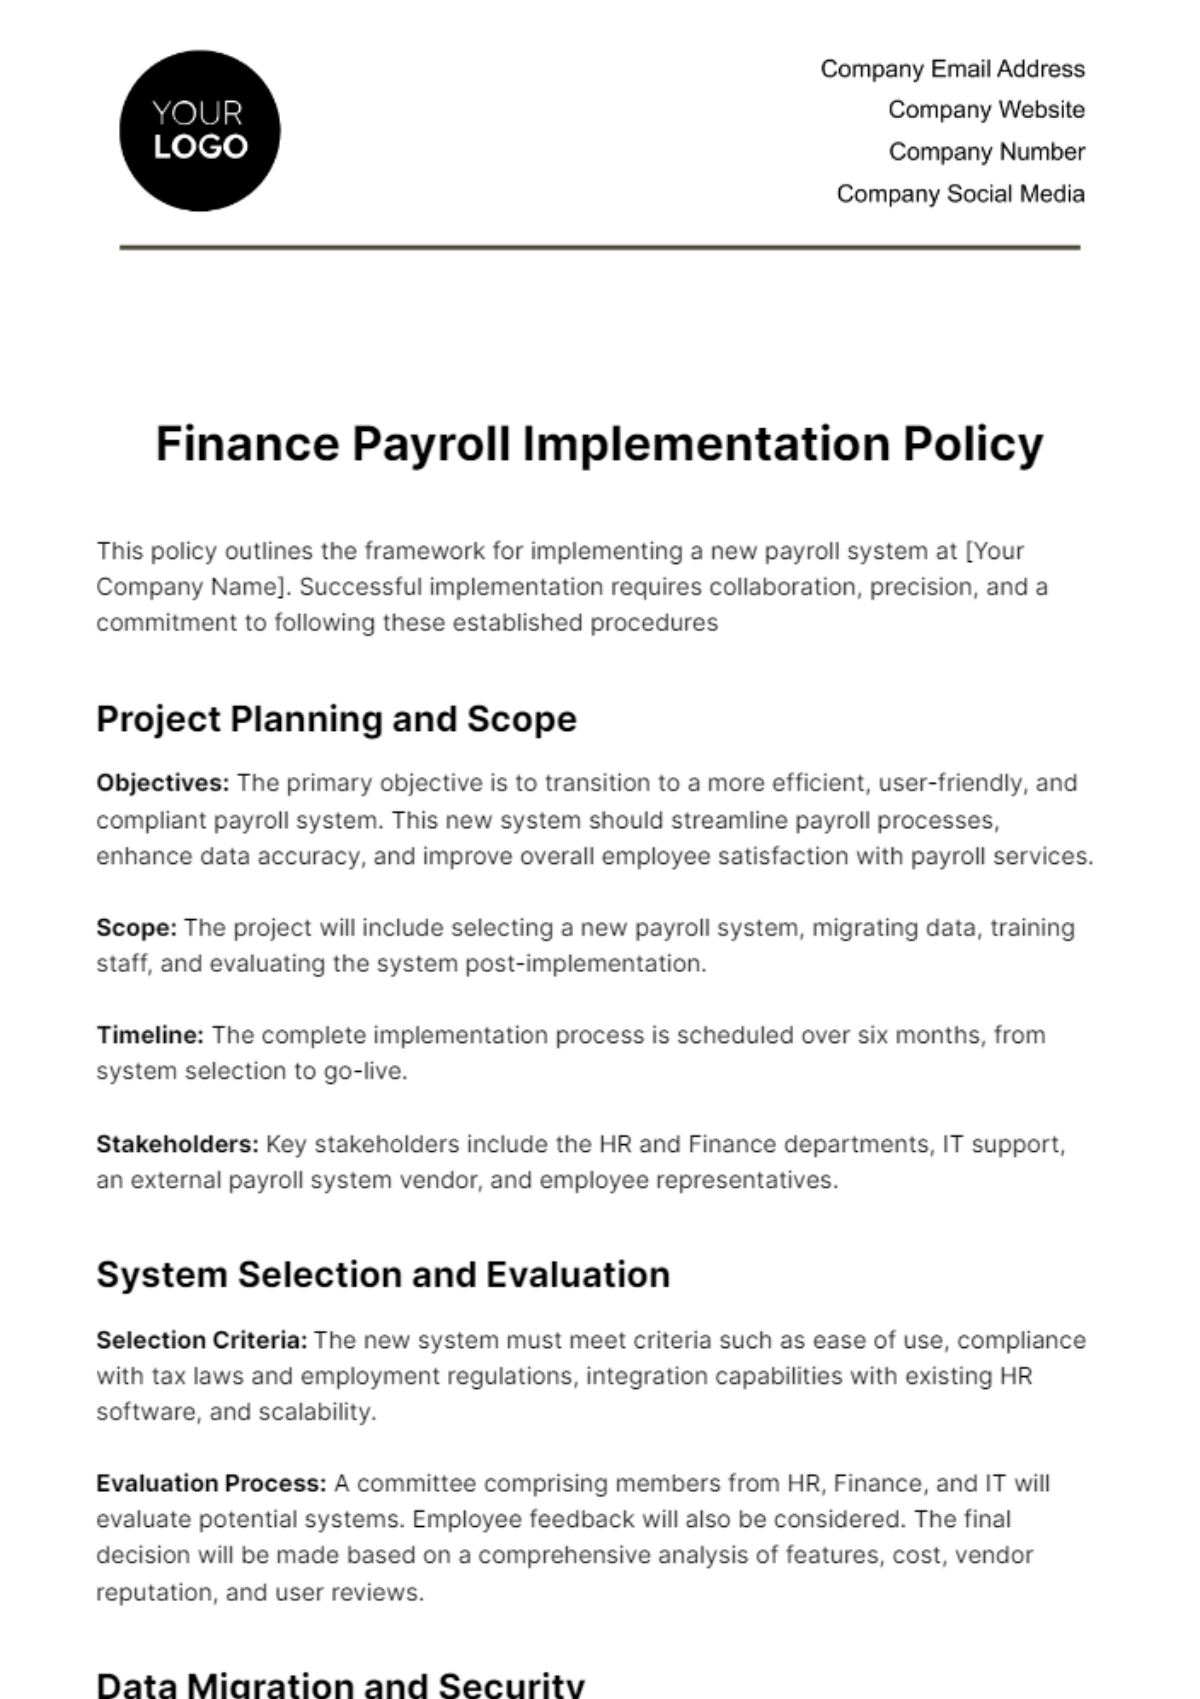 Free Finance Payroll Implementation Policy Template